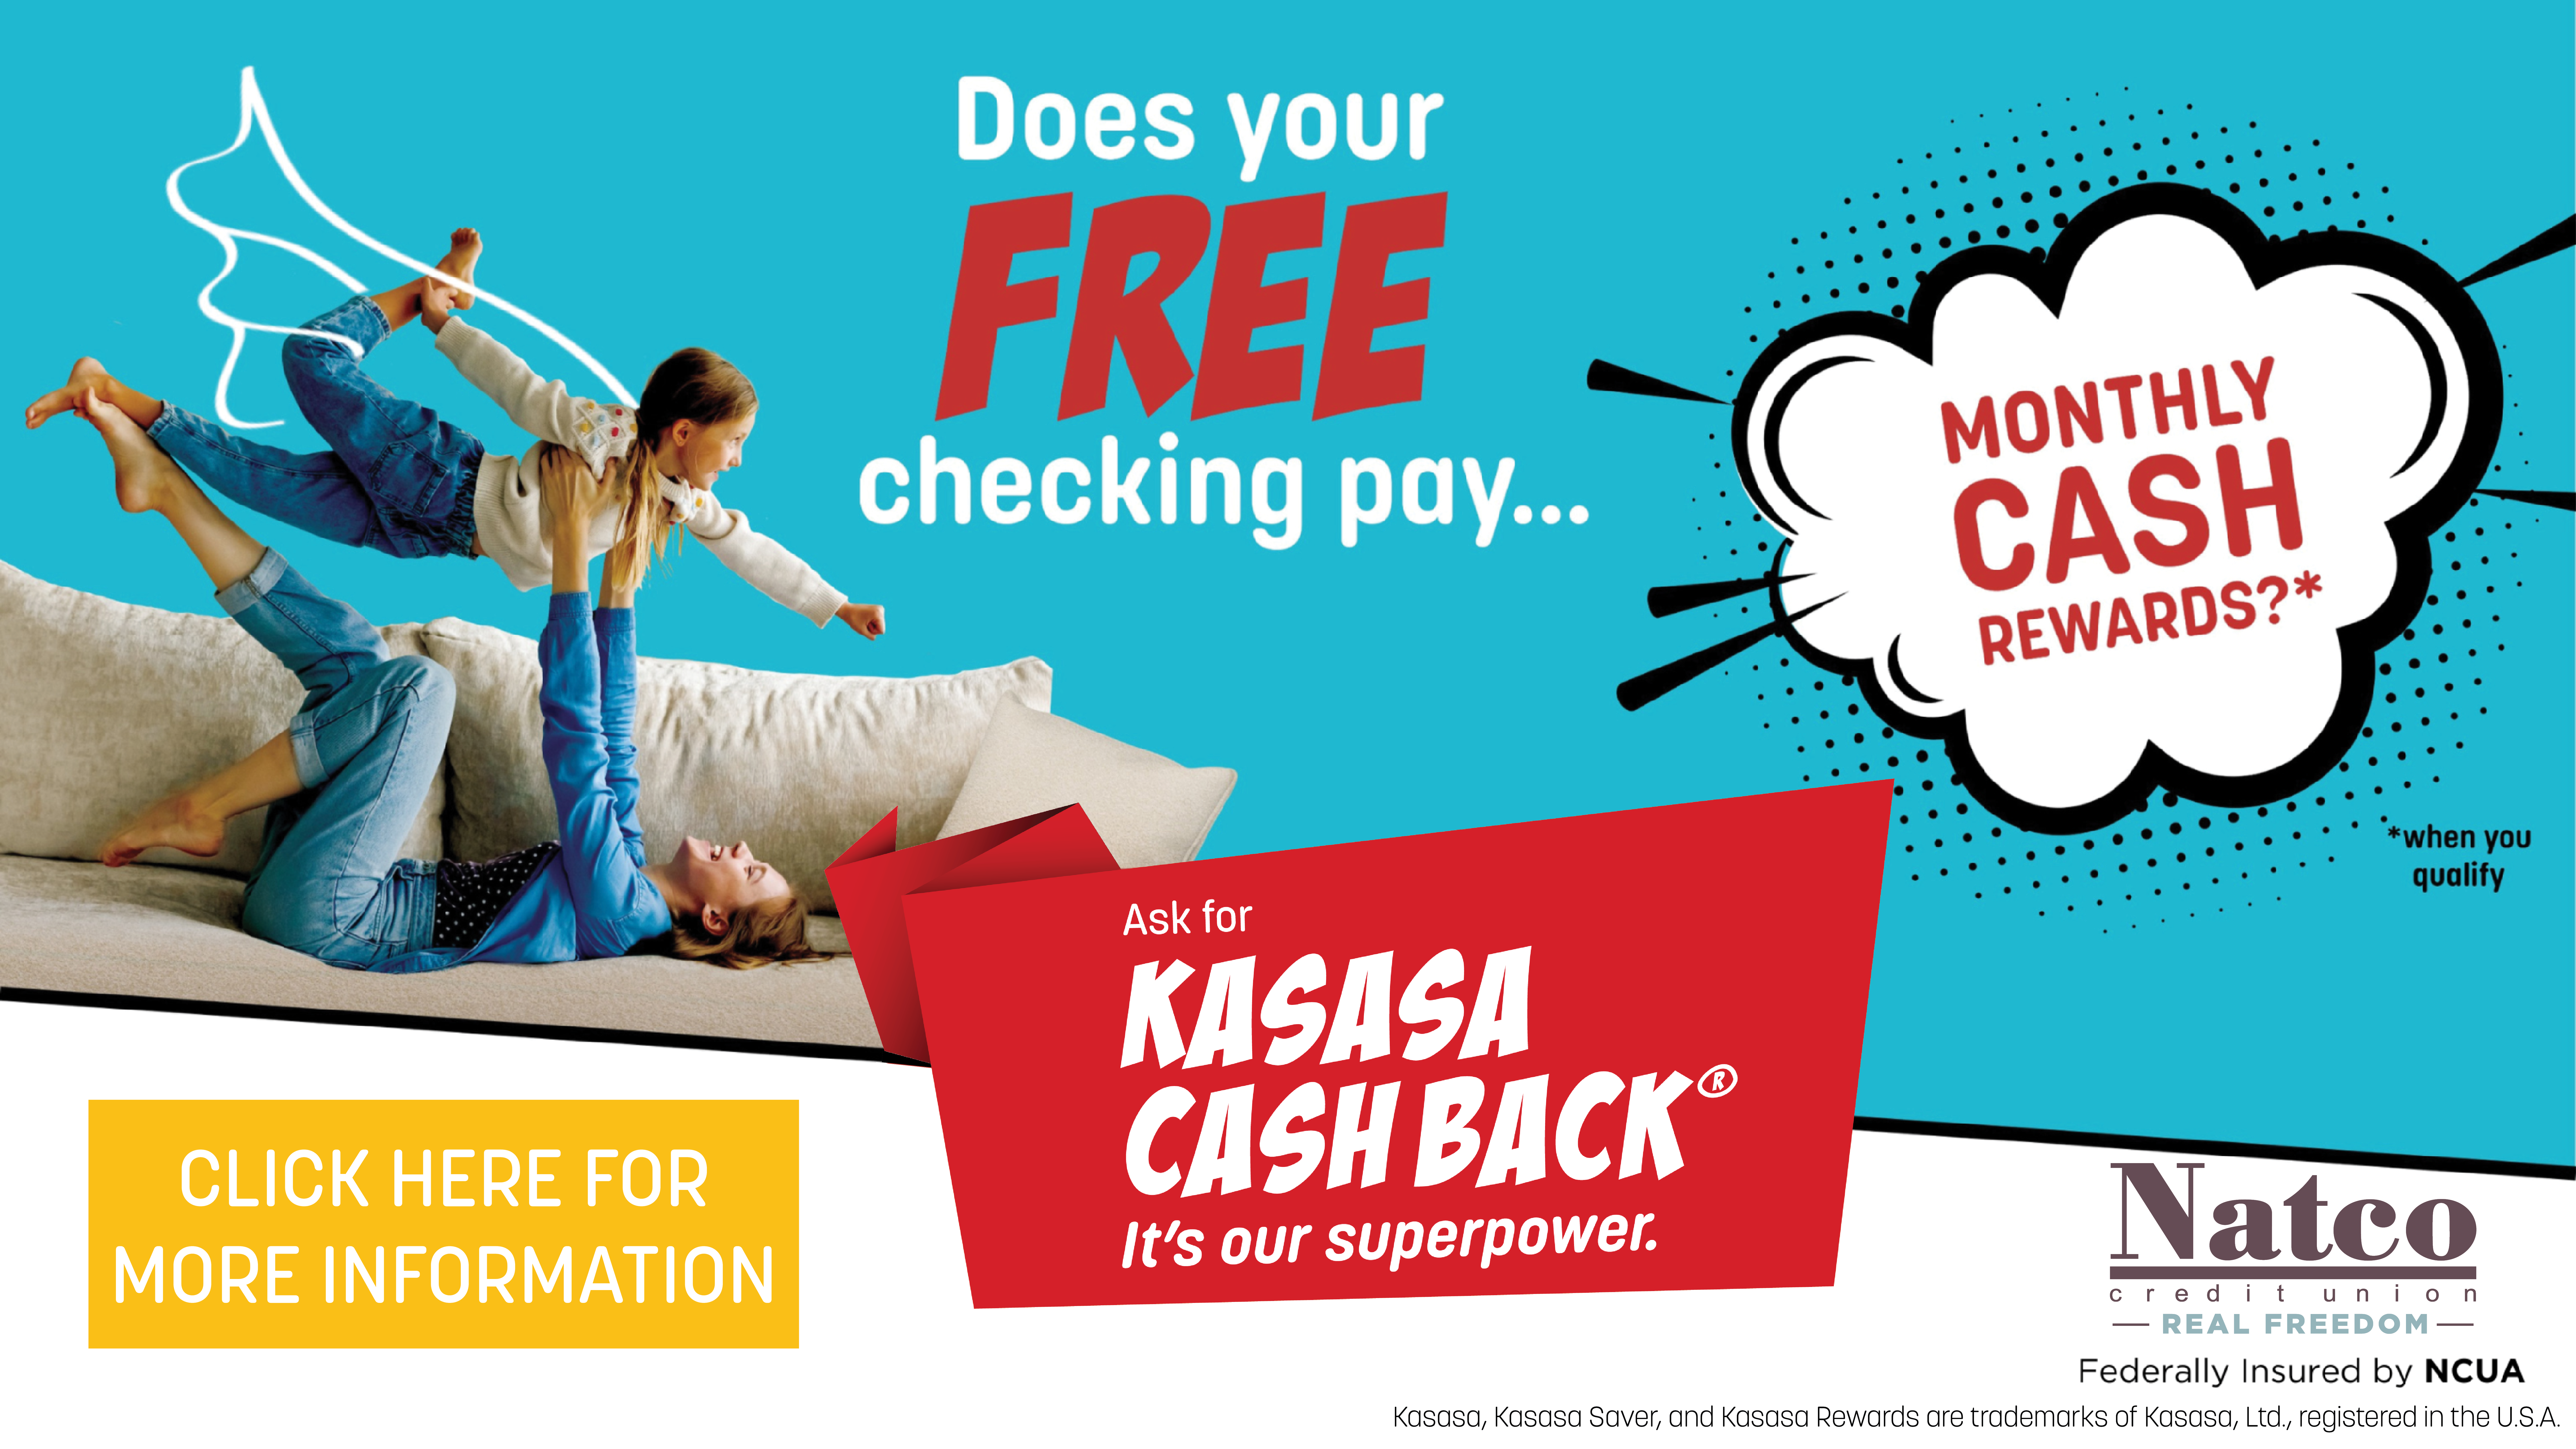 Does your free checking pay 4% APY. Ask for Kasasa Cash.